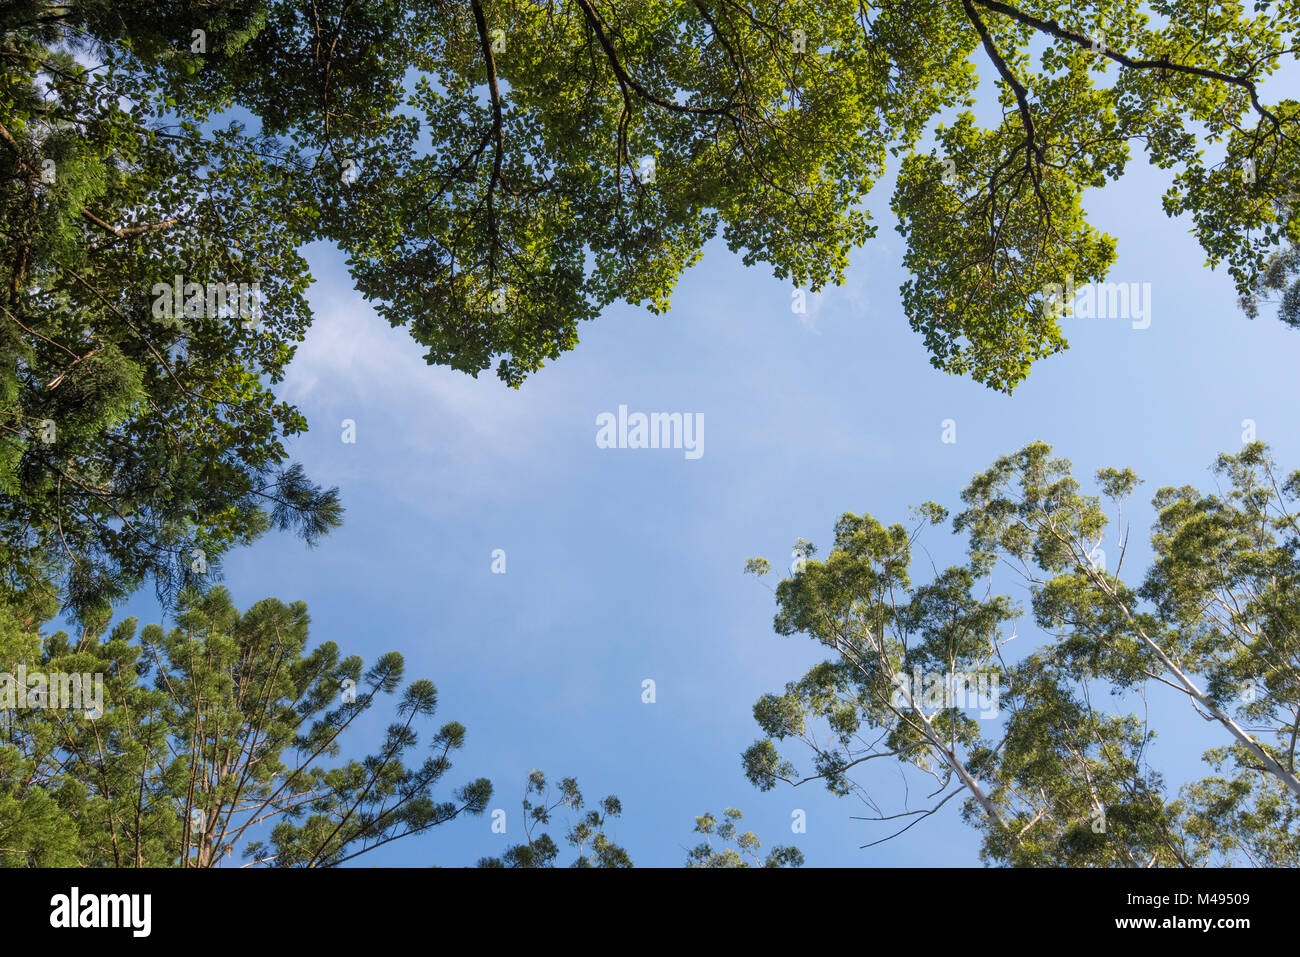 Looking up to the top of a stand of native Australian trees including Hoop Pines and Flooded Gums at the Yarriabini National Park in NSW, Australia Stock Photo